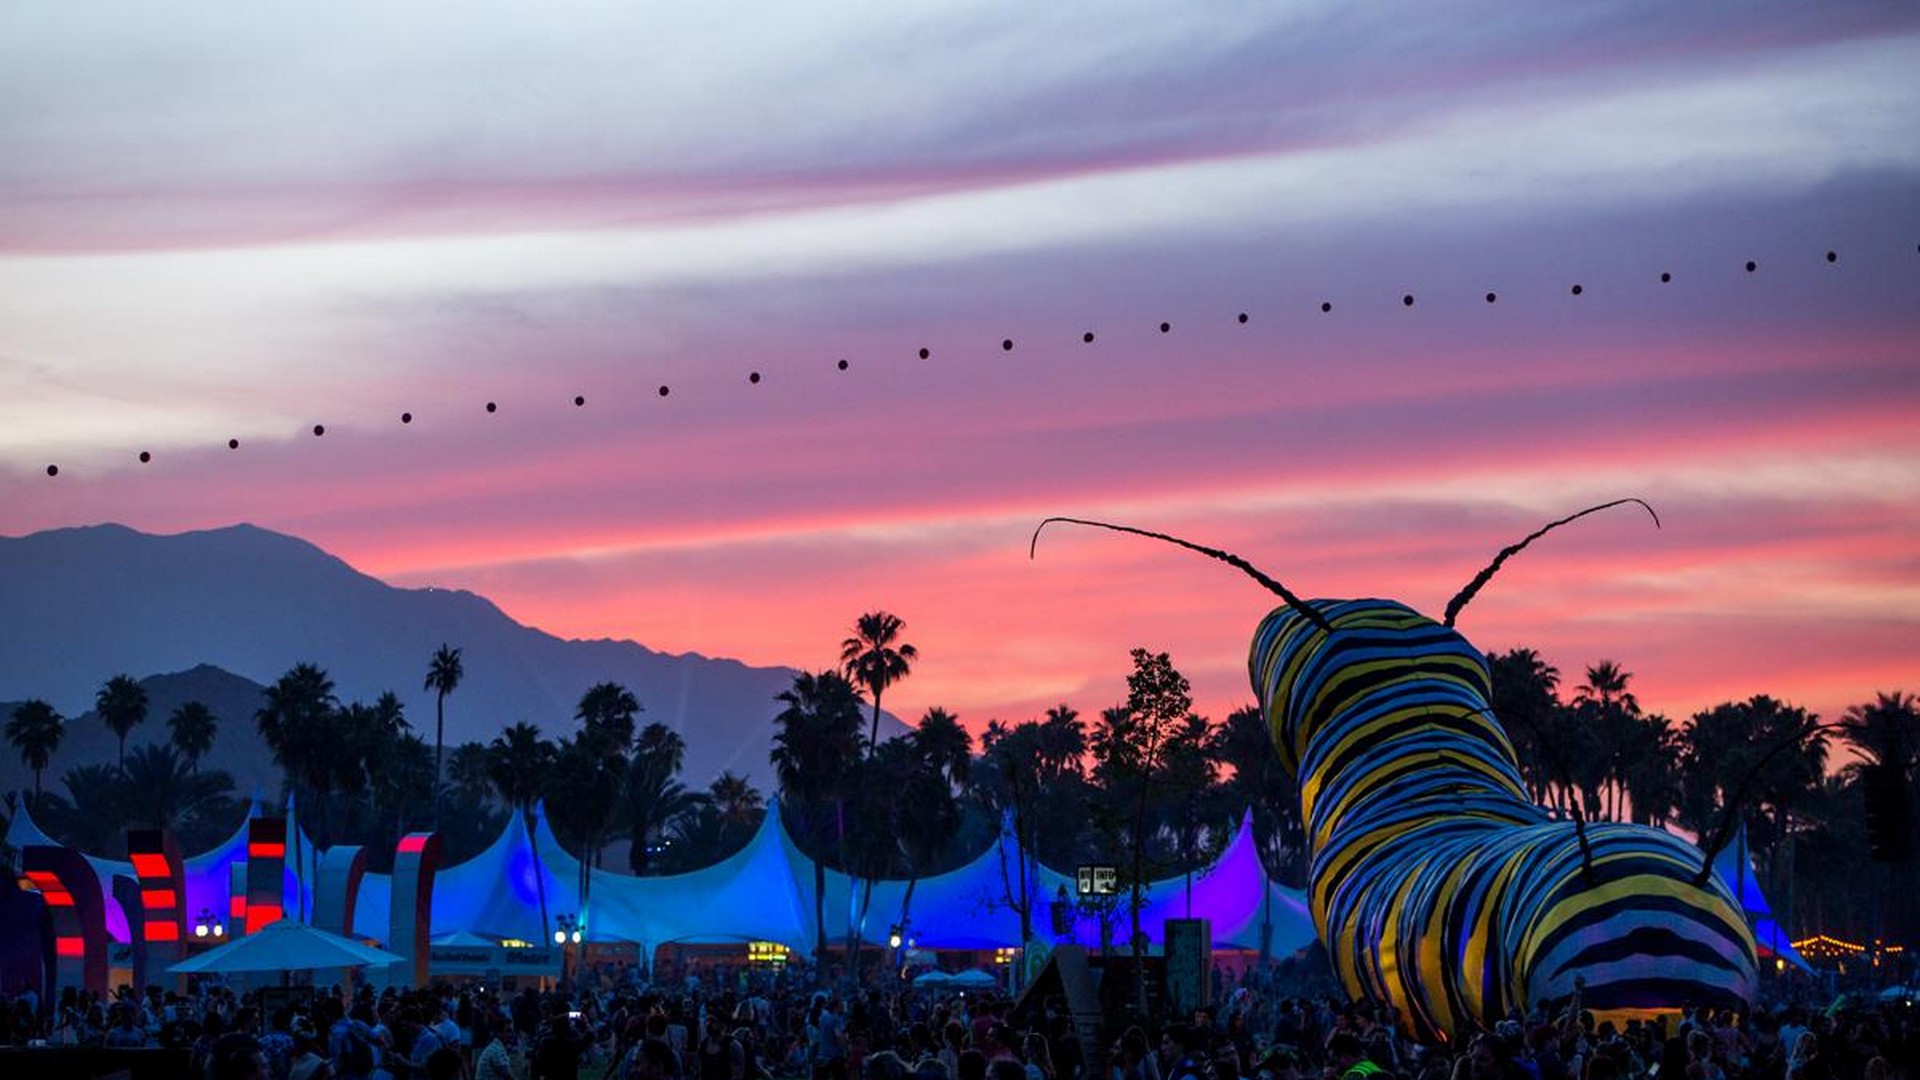 Coachella 2019 Desktop Wallpaper With high-resolution 1920X1080 pixel. You can use this wallpaper for your Windows and Mac OS computers as well as your Android and iPhone smartphones